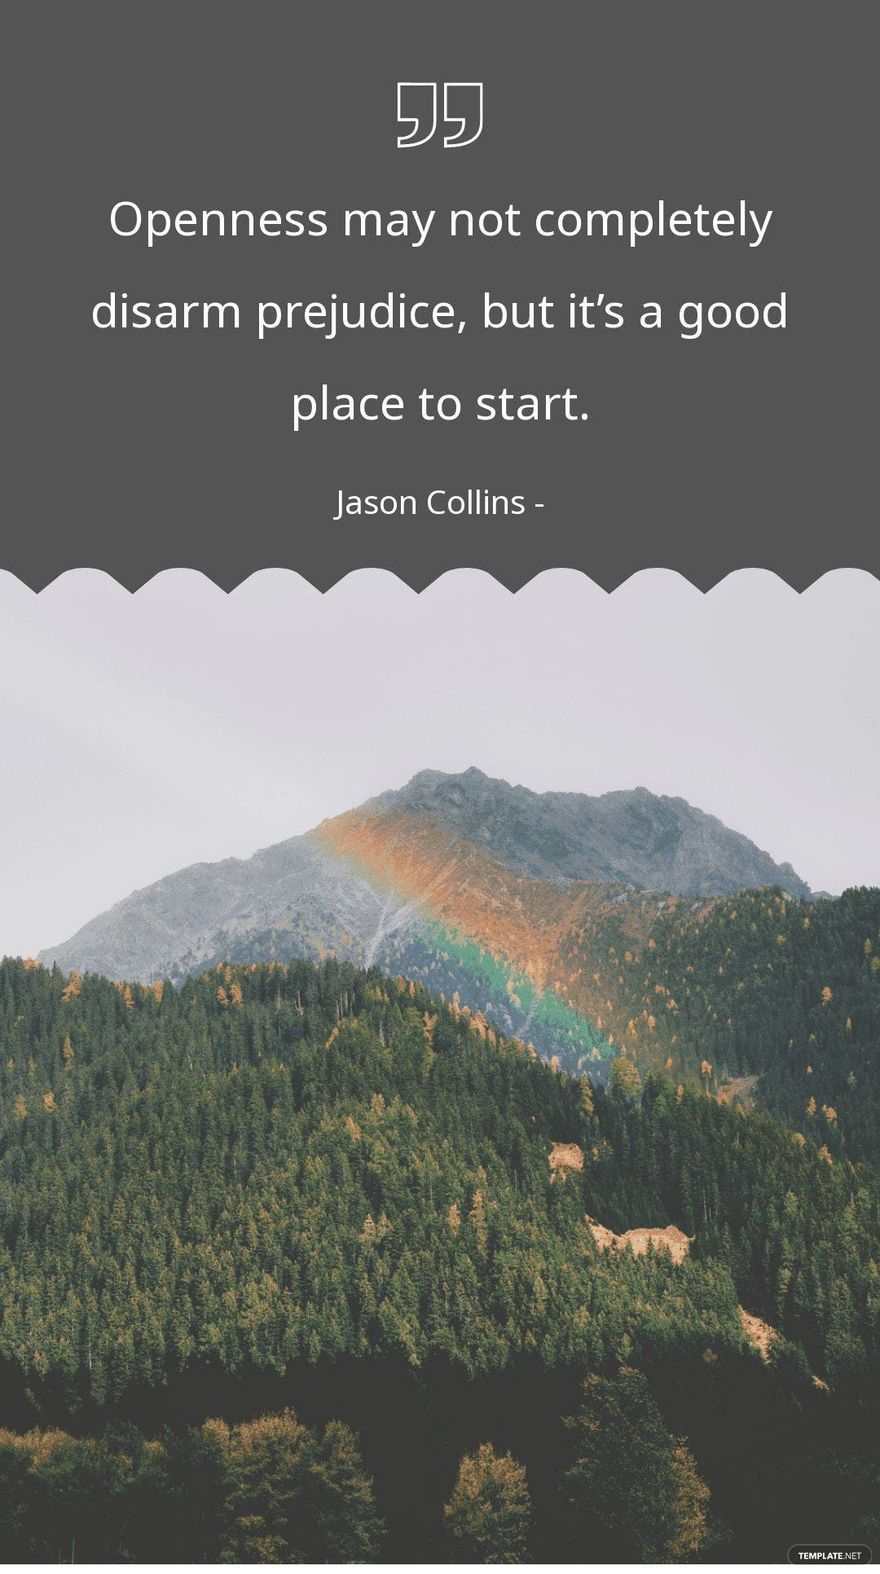 Free Jason Collins - Openness may not completely disarm prejudice, but it’s a good place to start.